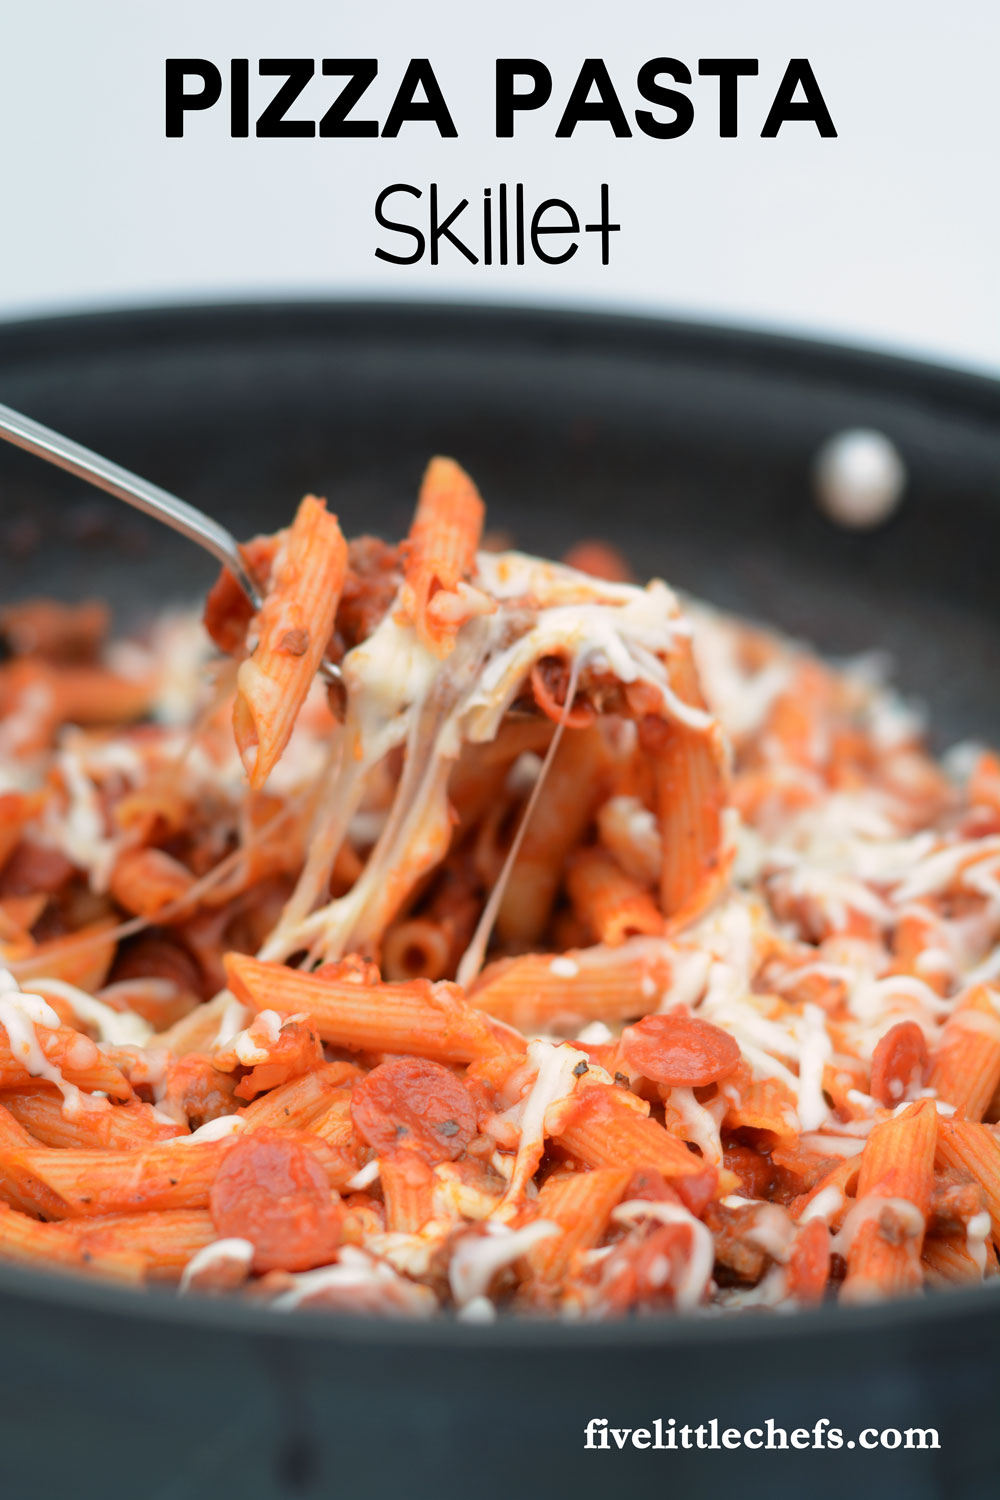 One Pot Pizza Pasta Skillet is a recipe that can be made in 30 minutes. This is one of those easy recipes for busy families. Go ahead and add more cheese if you love it extra cheesy!